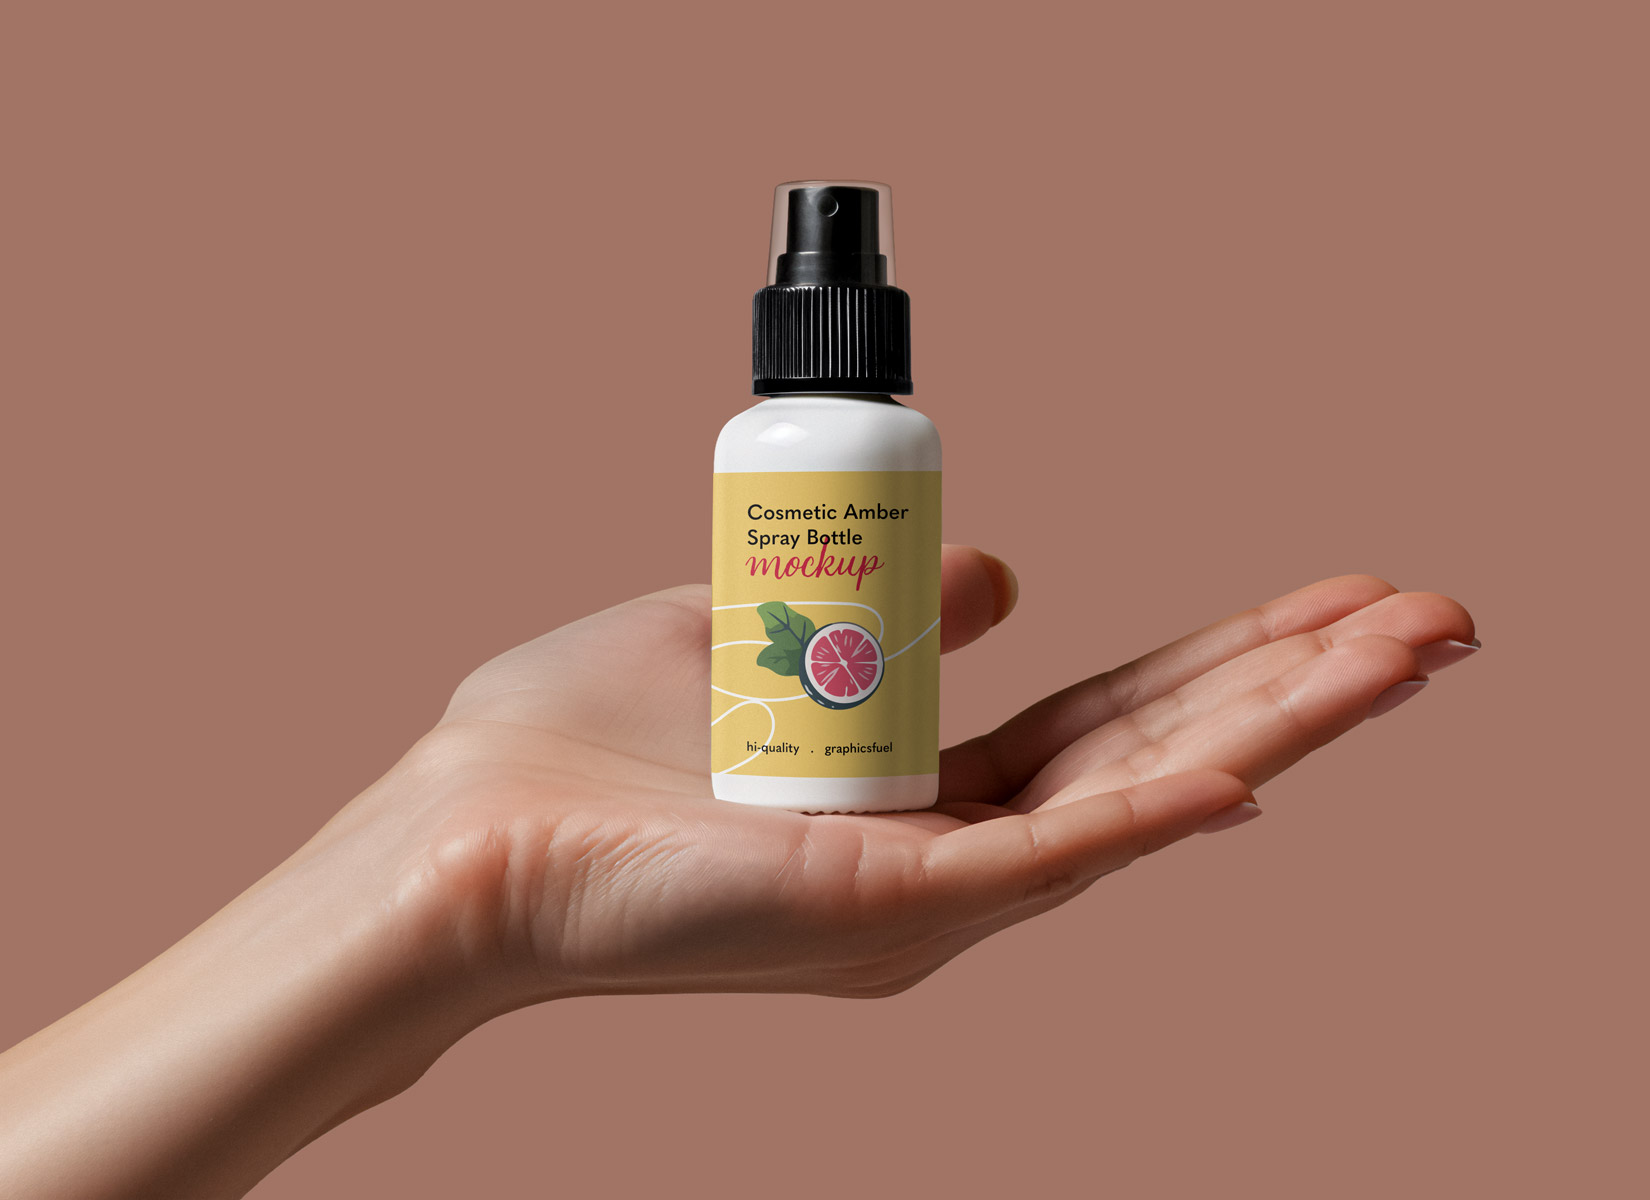 Cosmetic Amber Spray Bottle In Hand Mockup